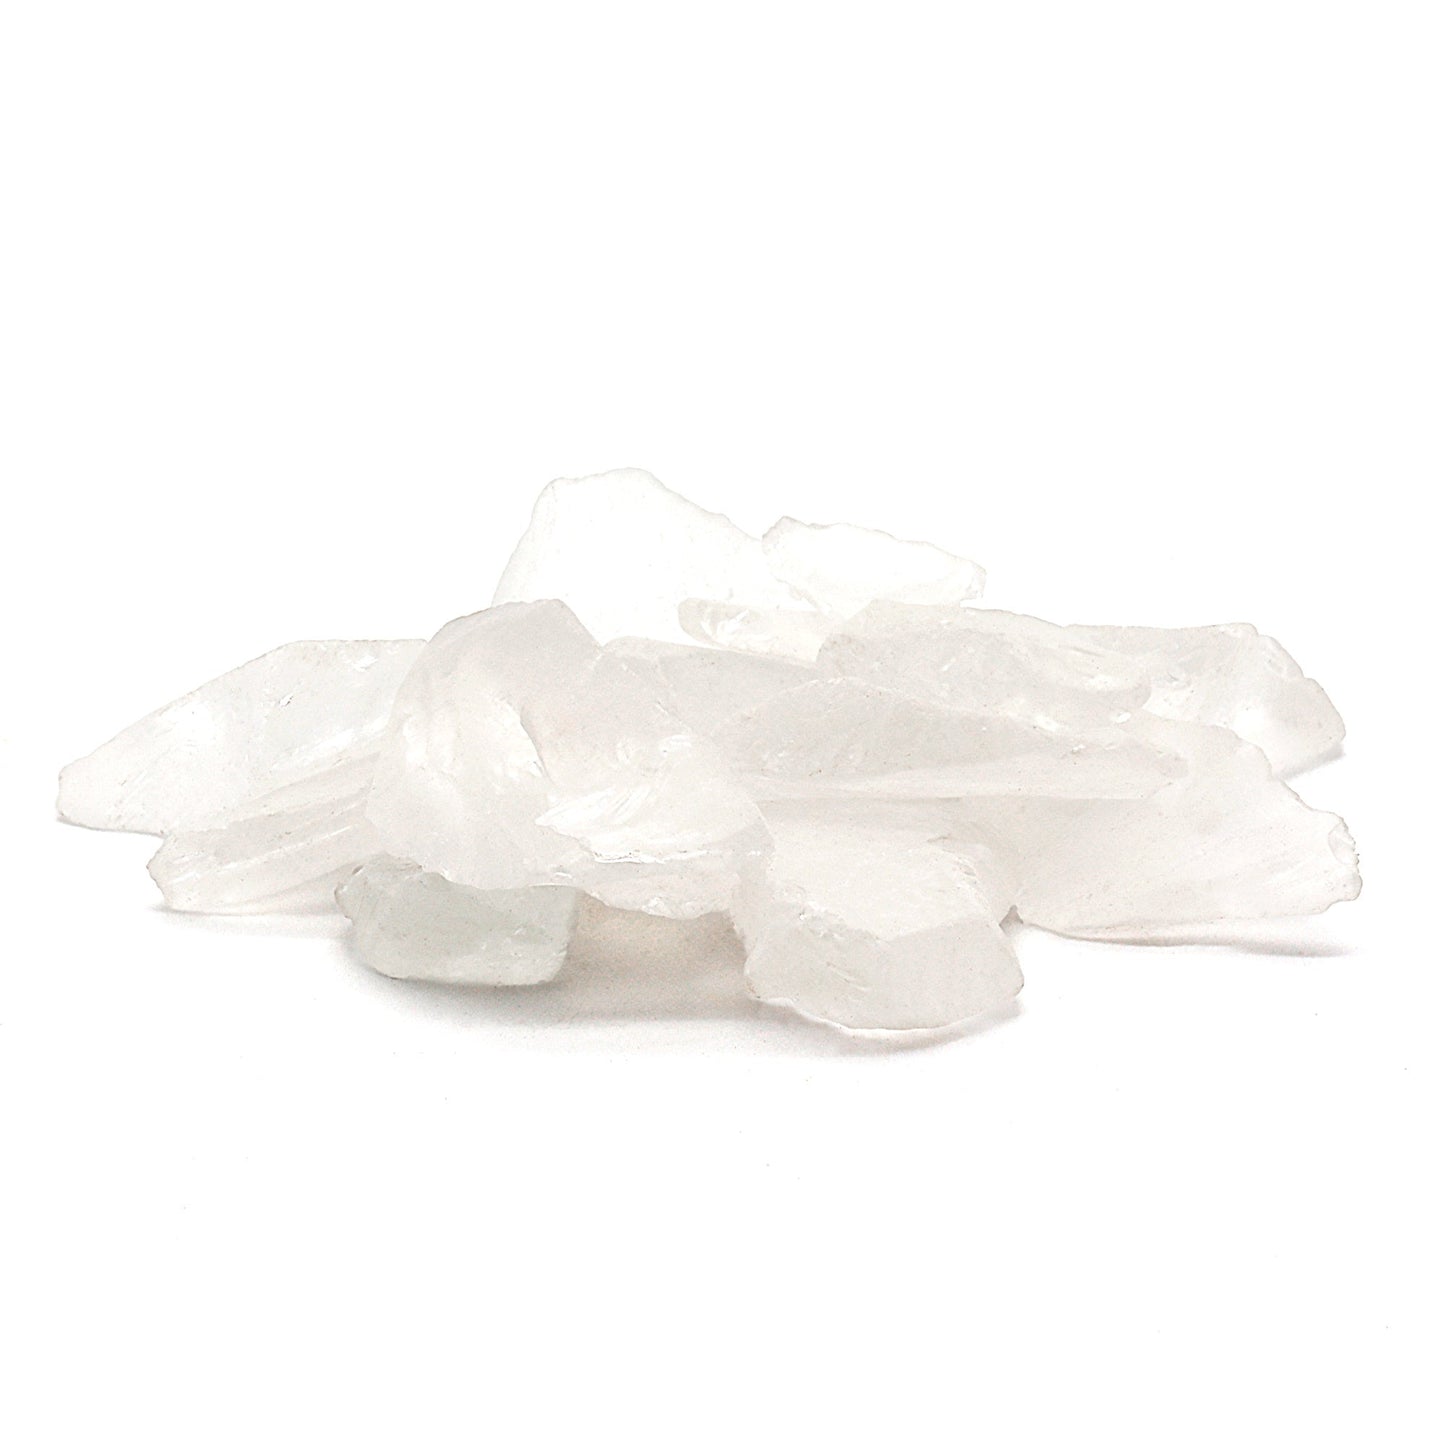 White Frosted Sea Glass Pebbles - 4 lb